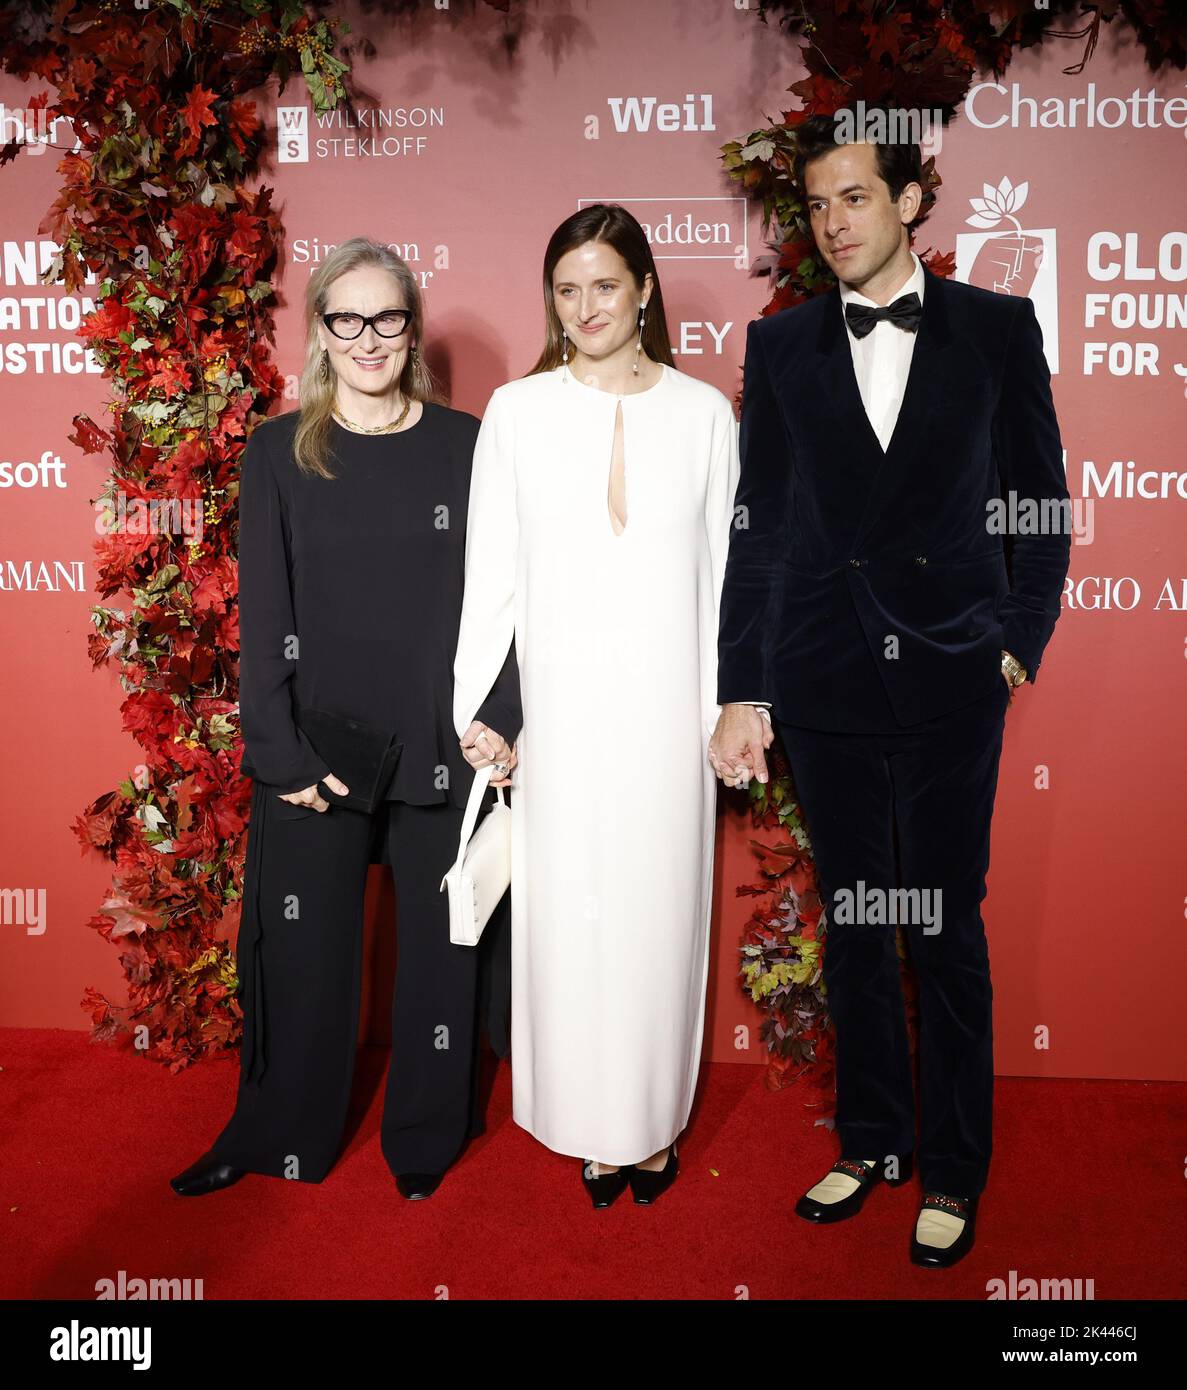 New York, United States. 29th Sep, 2022. Meryl Streep, Grace Gummer and Mark Ronson arrive on the red carpet at the Clooney Foundation For Justice Inaugural Albie Awards at New York Public Library on Thursday, September 29, 2022 in New York City. Photo by John Angelillo/UPI Credit: UPI/Alamy Live News Stock Photo